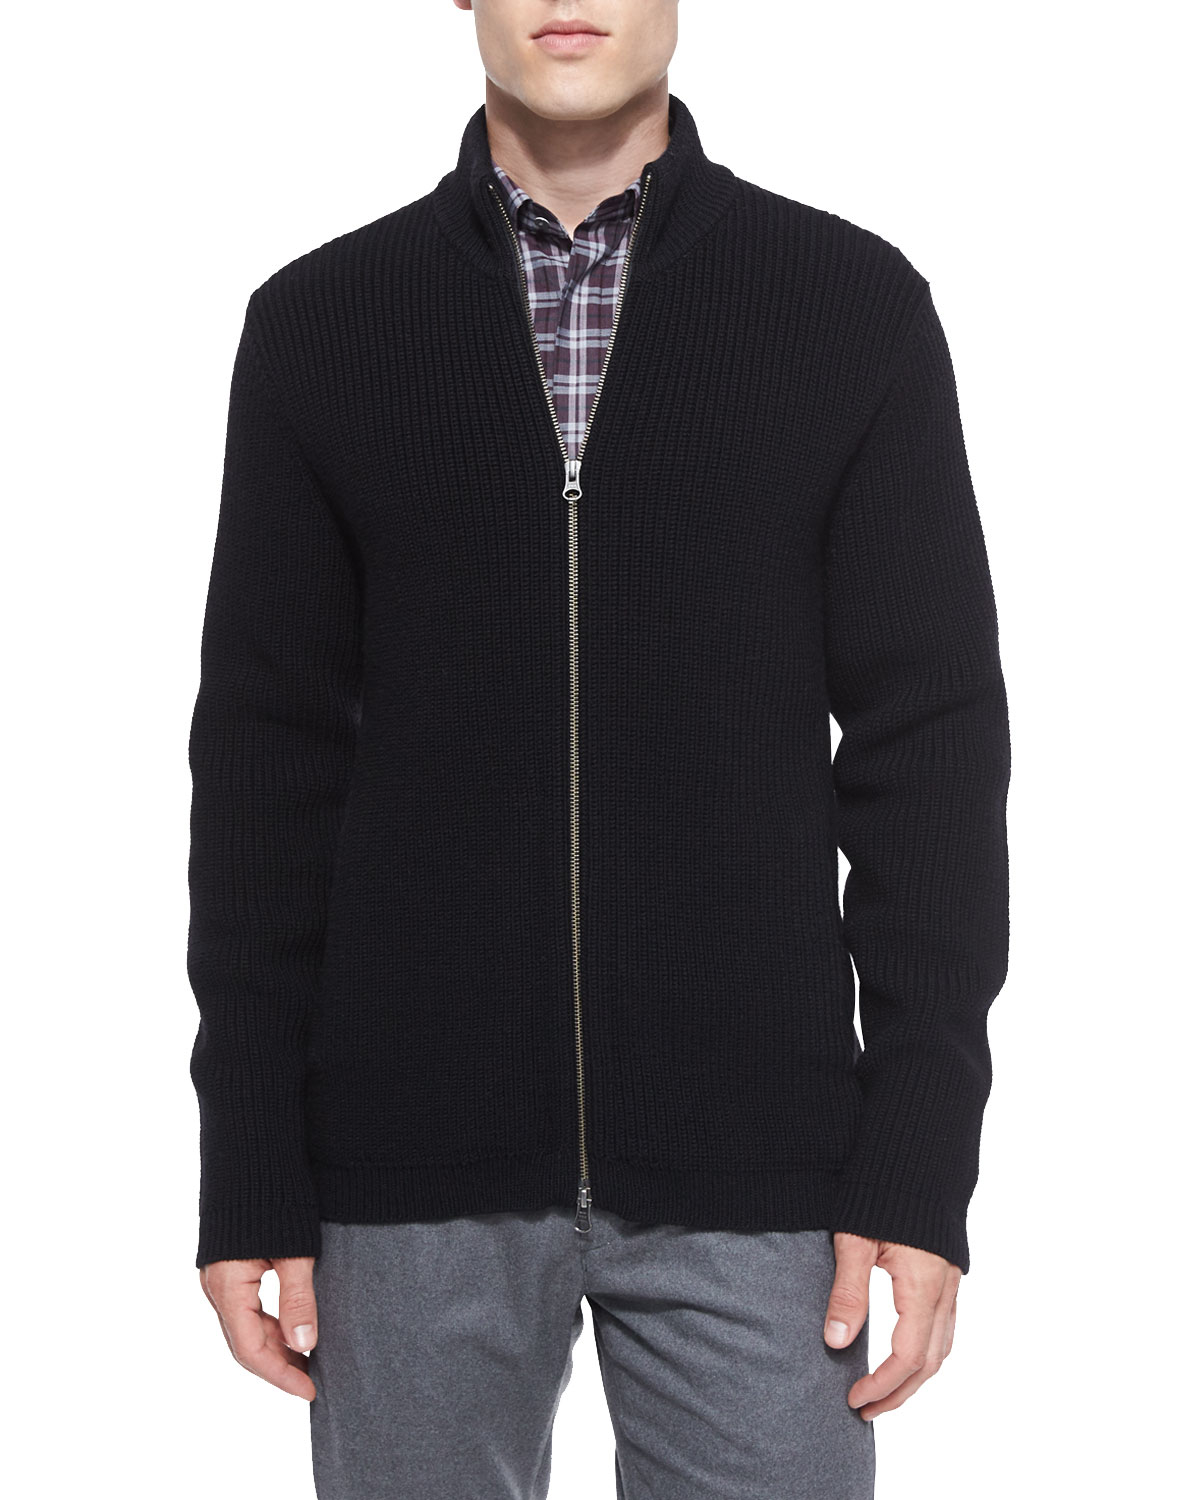 Lyst - Theory Lacham Ribbed Zip-up Sweater in Black for Men